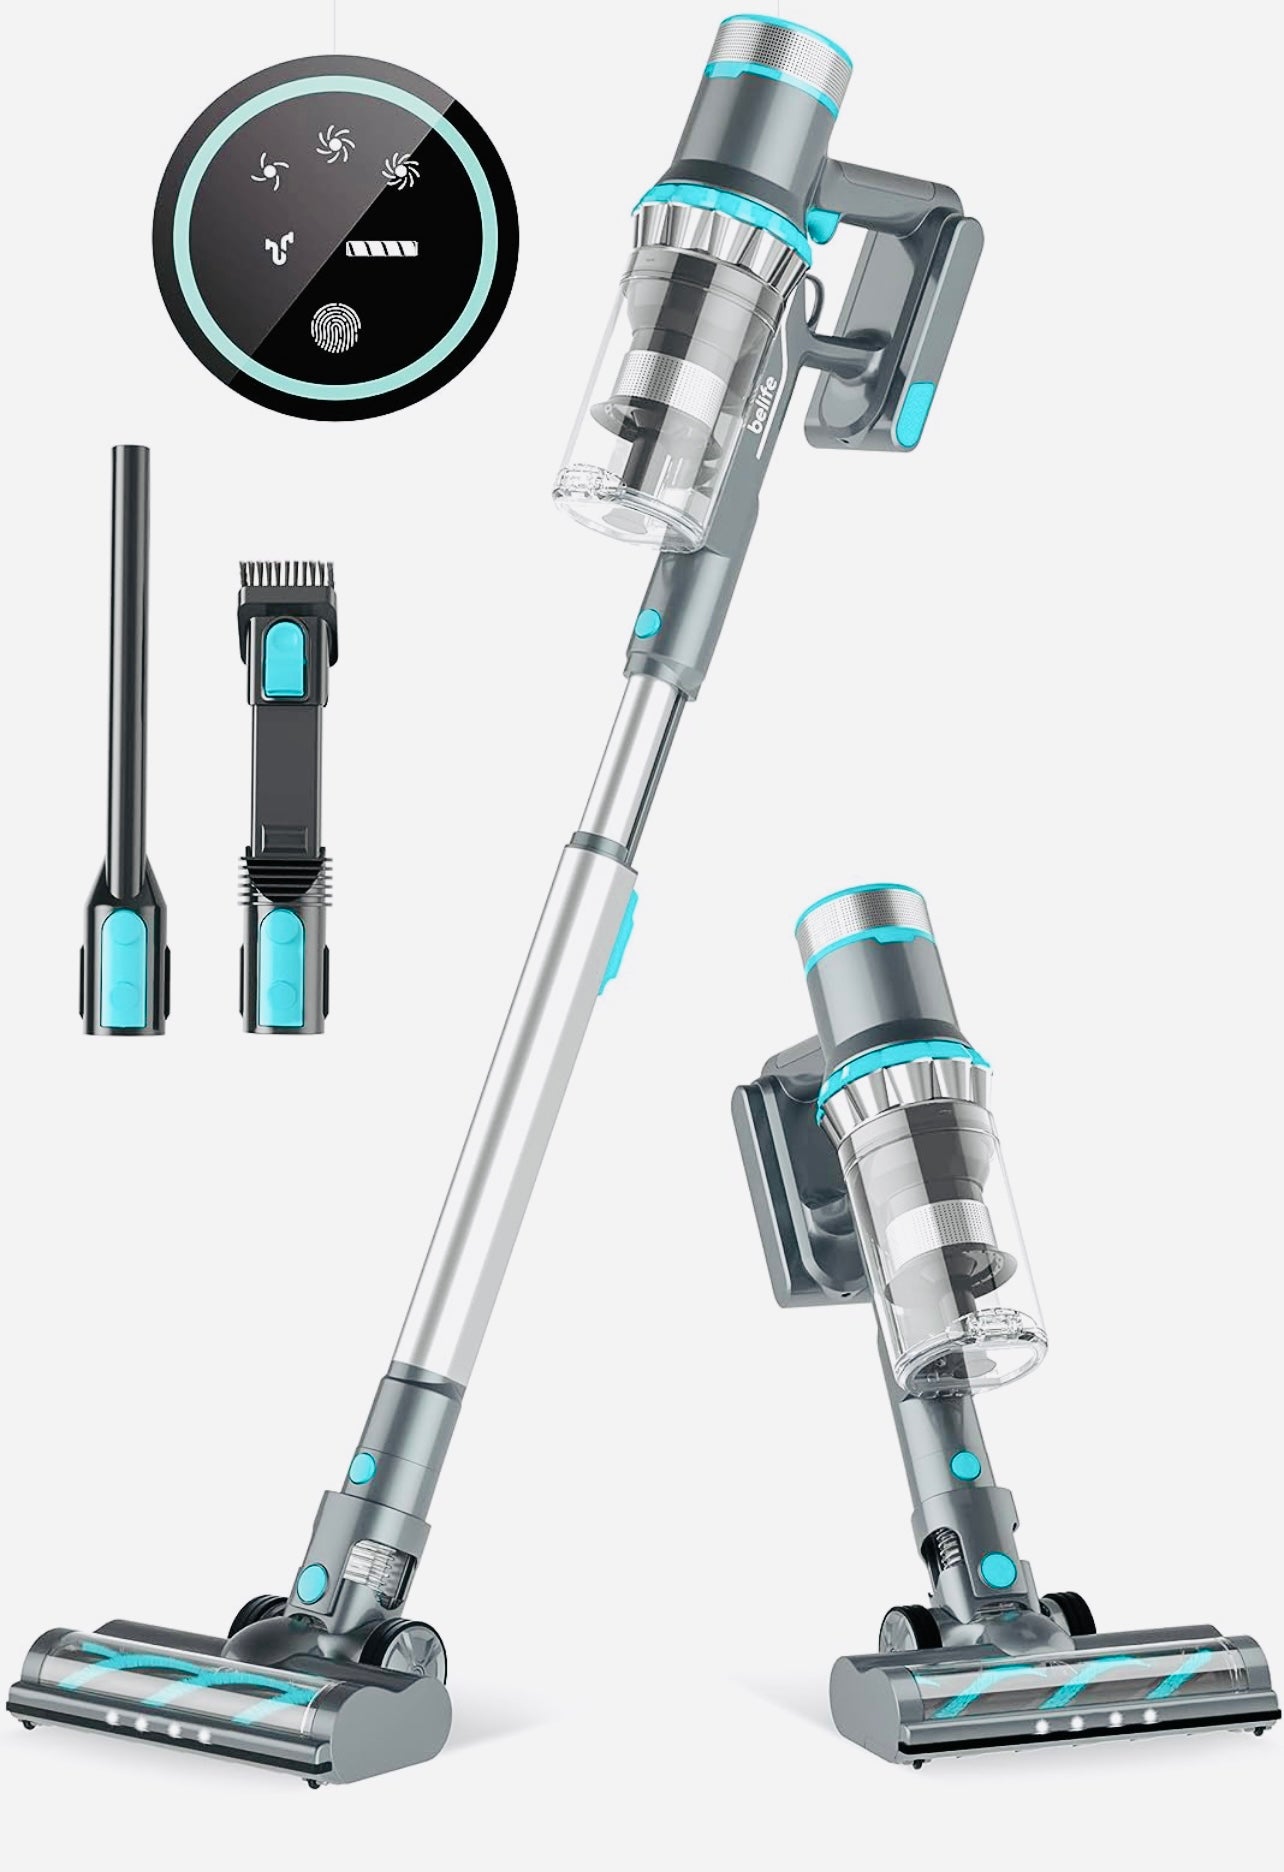 Belife Cordless Vacuum Cleaner, Stick Vacuum with 25Kpa Powerful Suction, 380W Brushless Motor, Up to 40mins Runtime, LED Display, 6 in 1 Lightweight Vacuum for Hard Floor Carpet Car Pet Hair